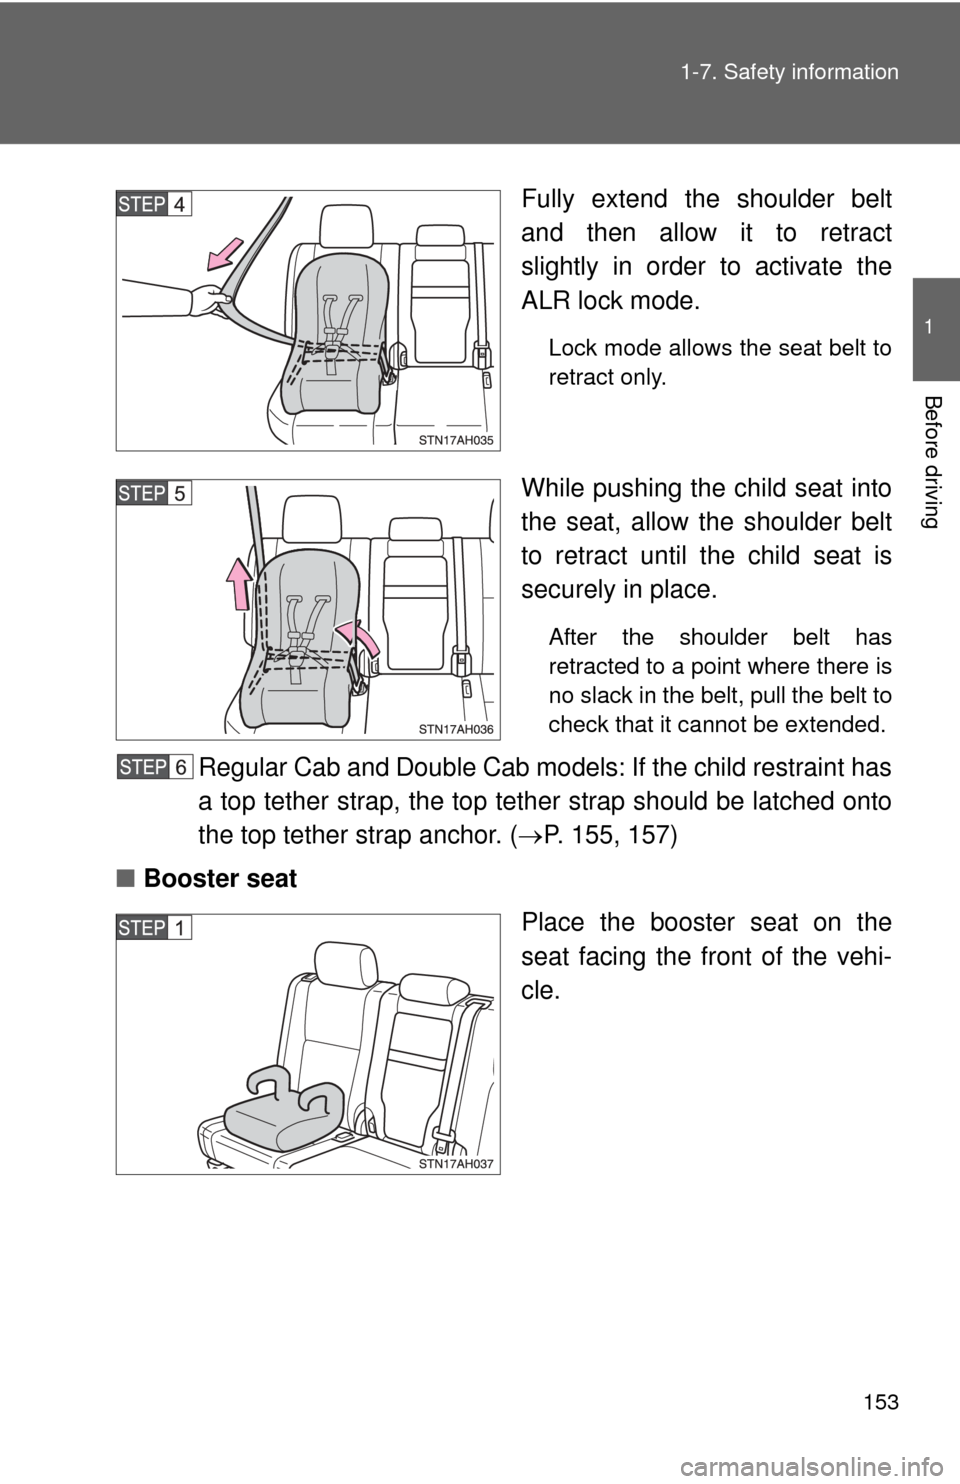 TOYOTA TUNDRA 2012 2.G Service Manual 153
1-7. Safety information
1
Before driving
Fully extend the shoulder belt
and then allow it to retract
slightly in order to activate the
ALR lock mode.
Lock mode allows the seat belt to
retract only